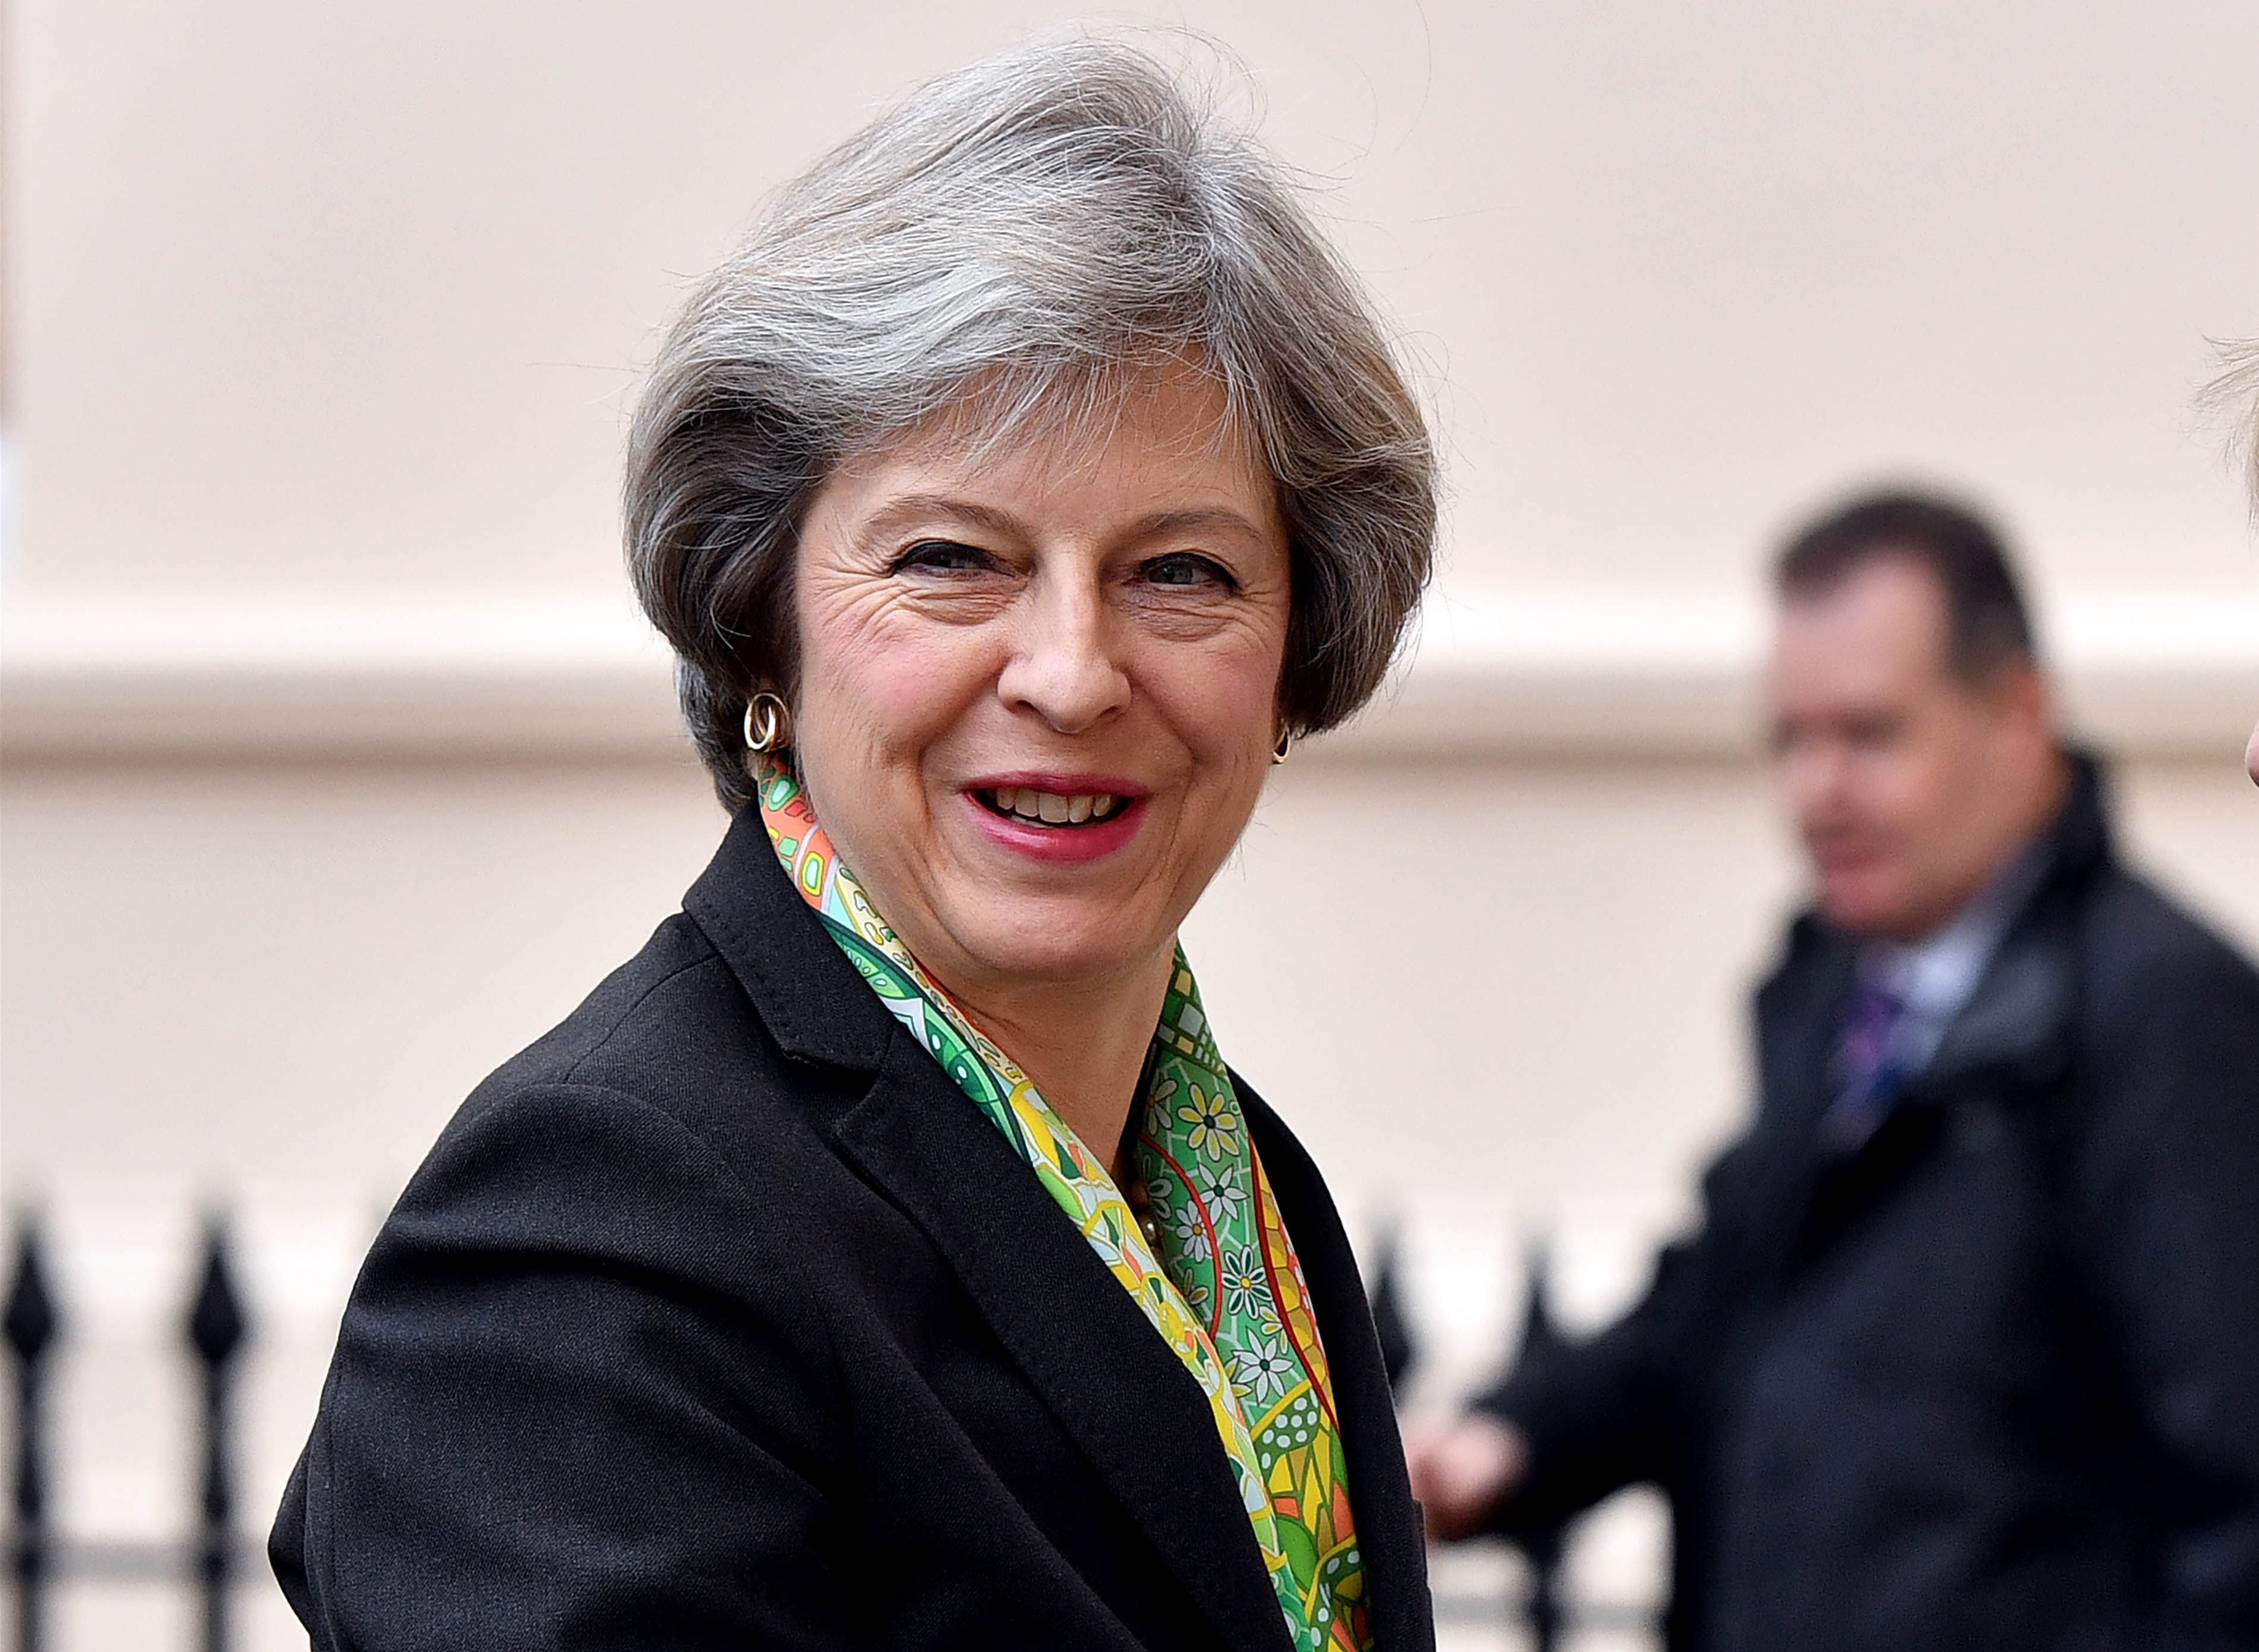 Theresa May became prime minister in the wake of Britain's June 2016 referendum vote to leave the European Union. (Photo: Andrew Parsons/i-Images / Polaris/Newscom)